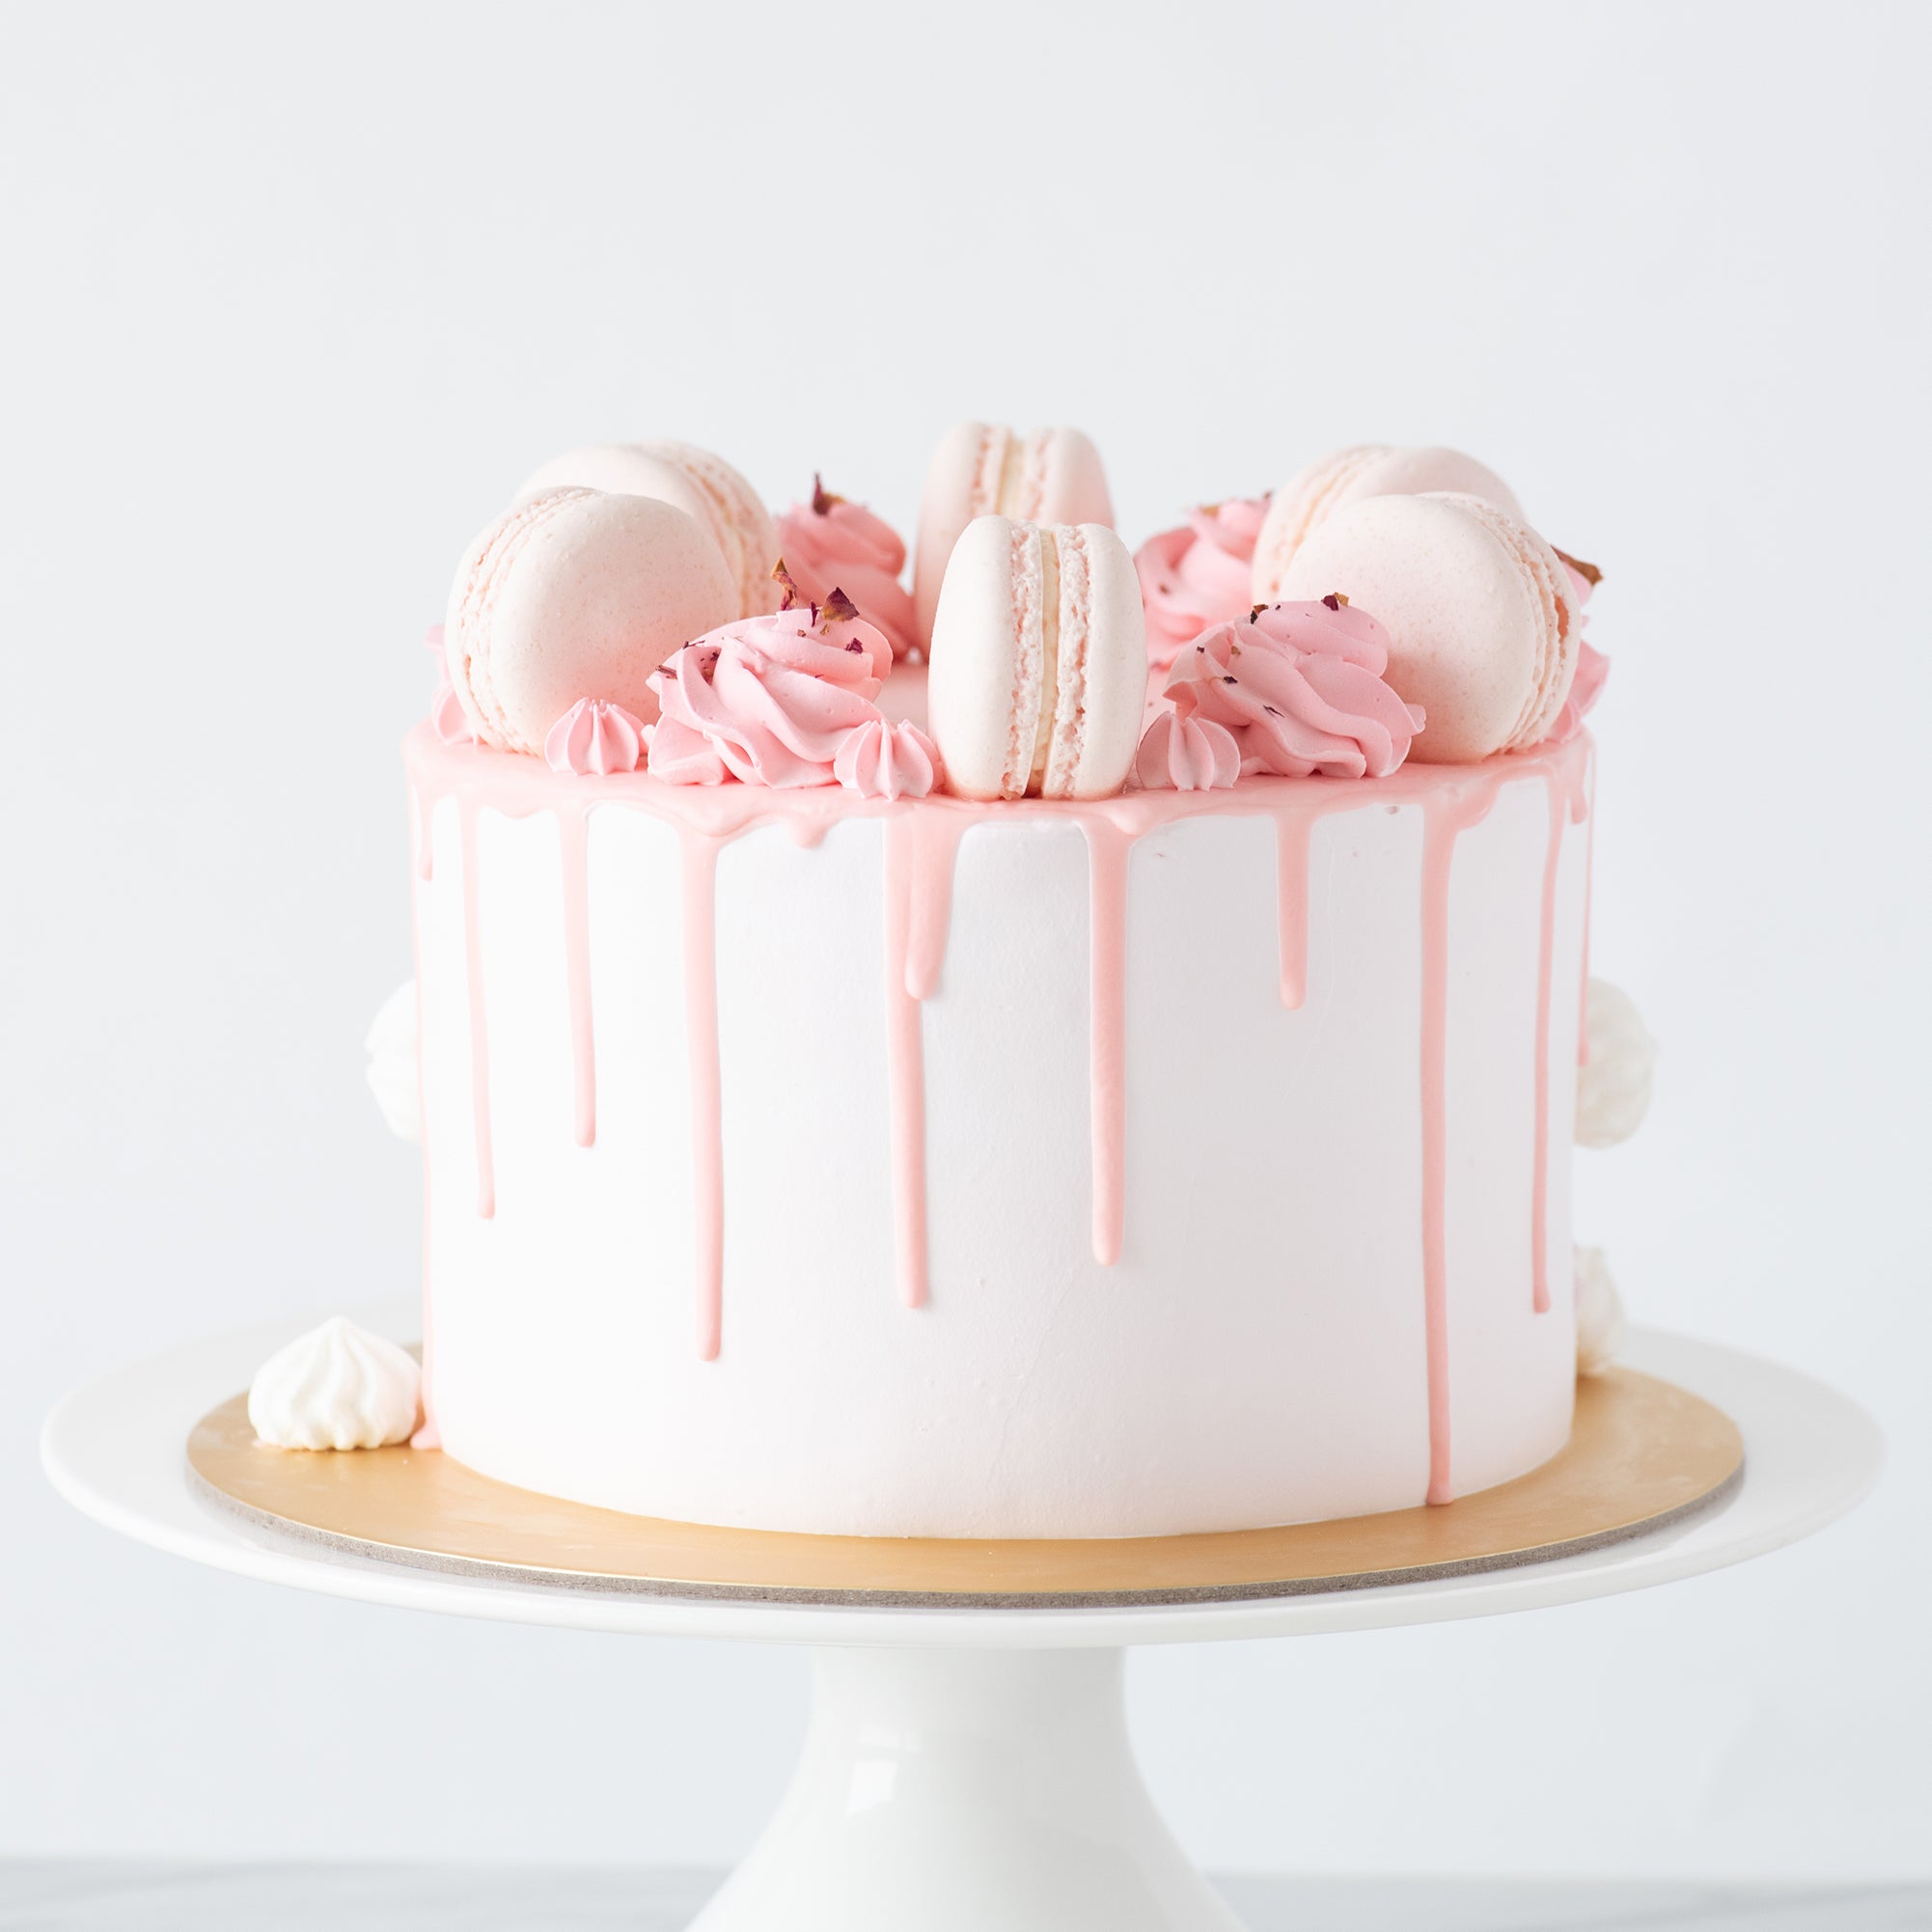 Buttercream Celebration Cakes | Afternoon Crumbs | Claygate, Surrey